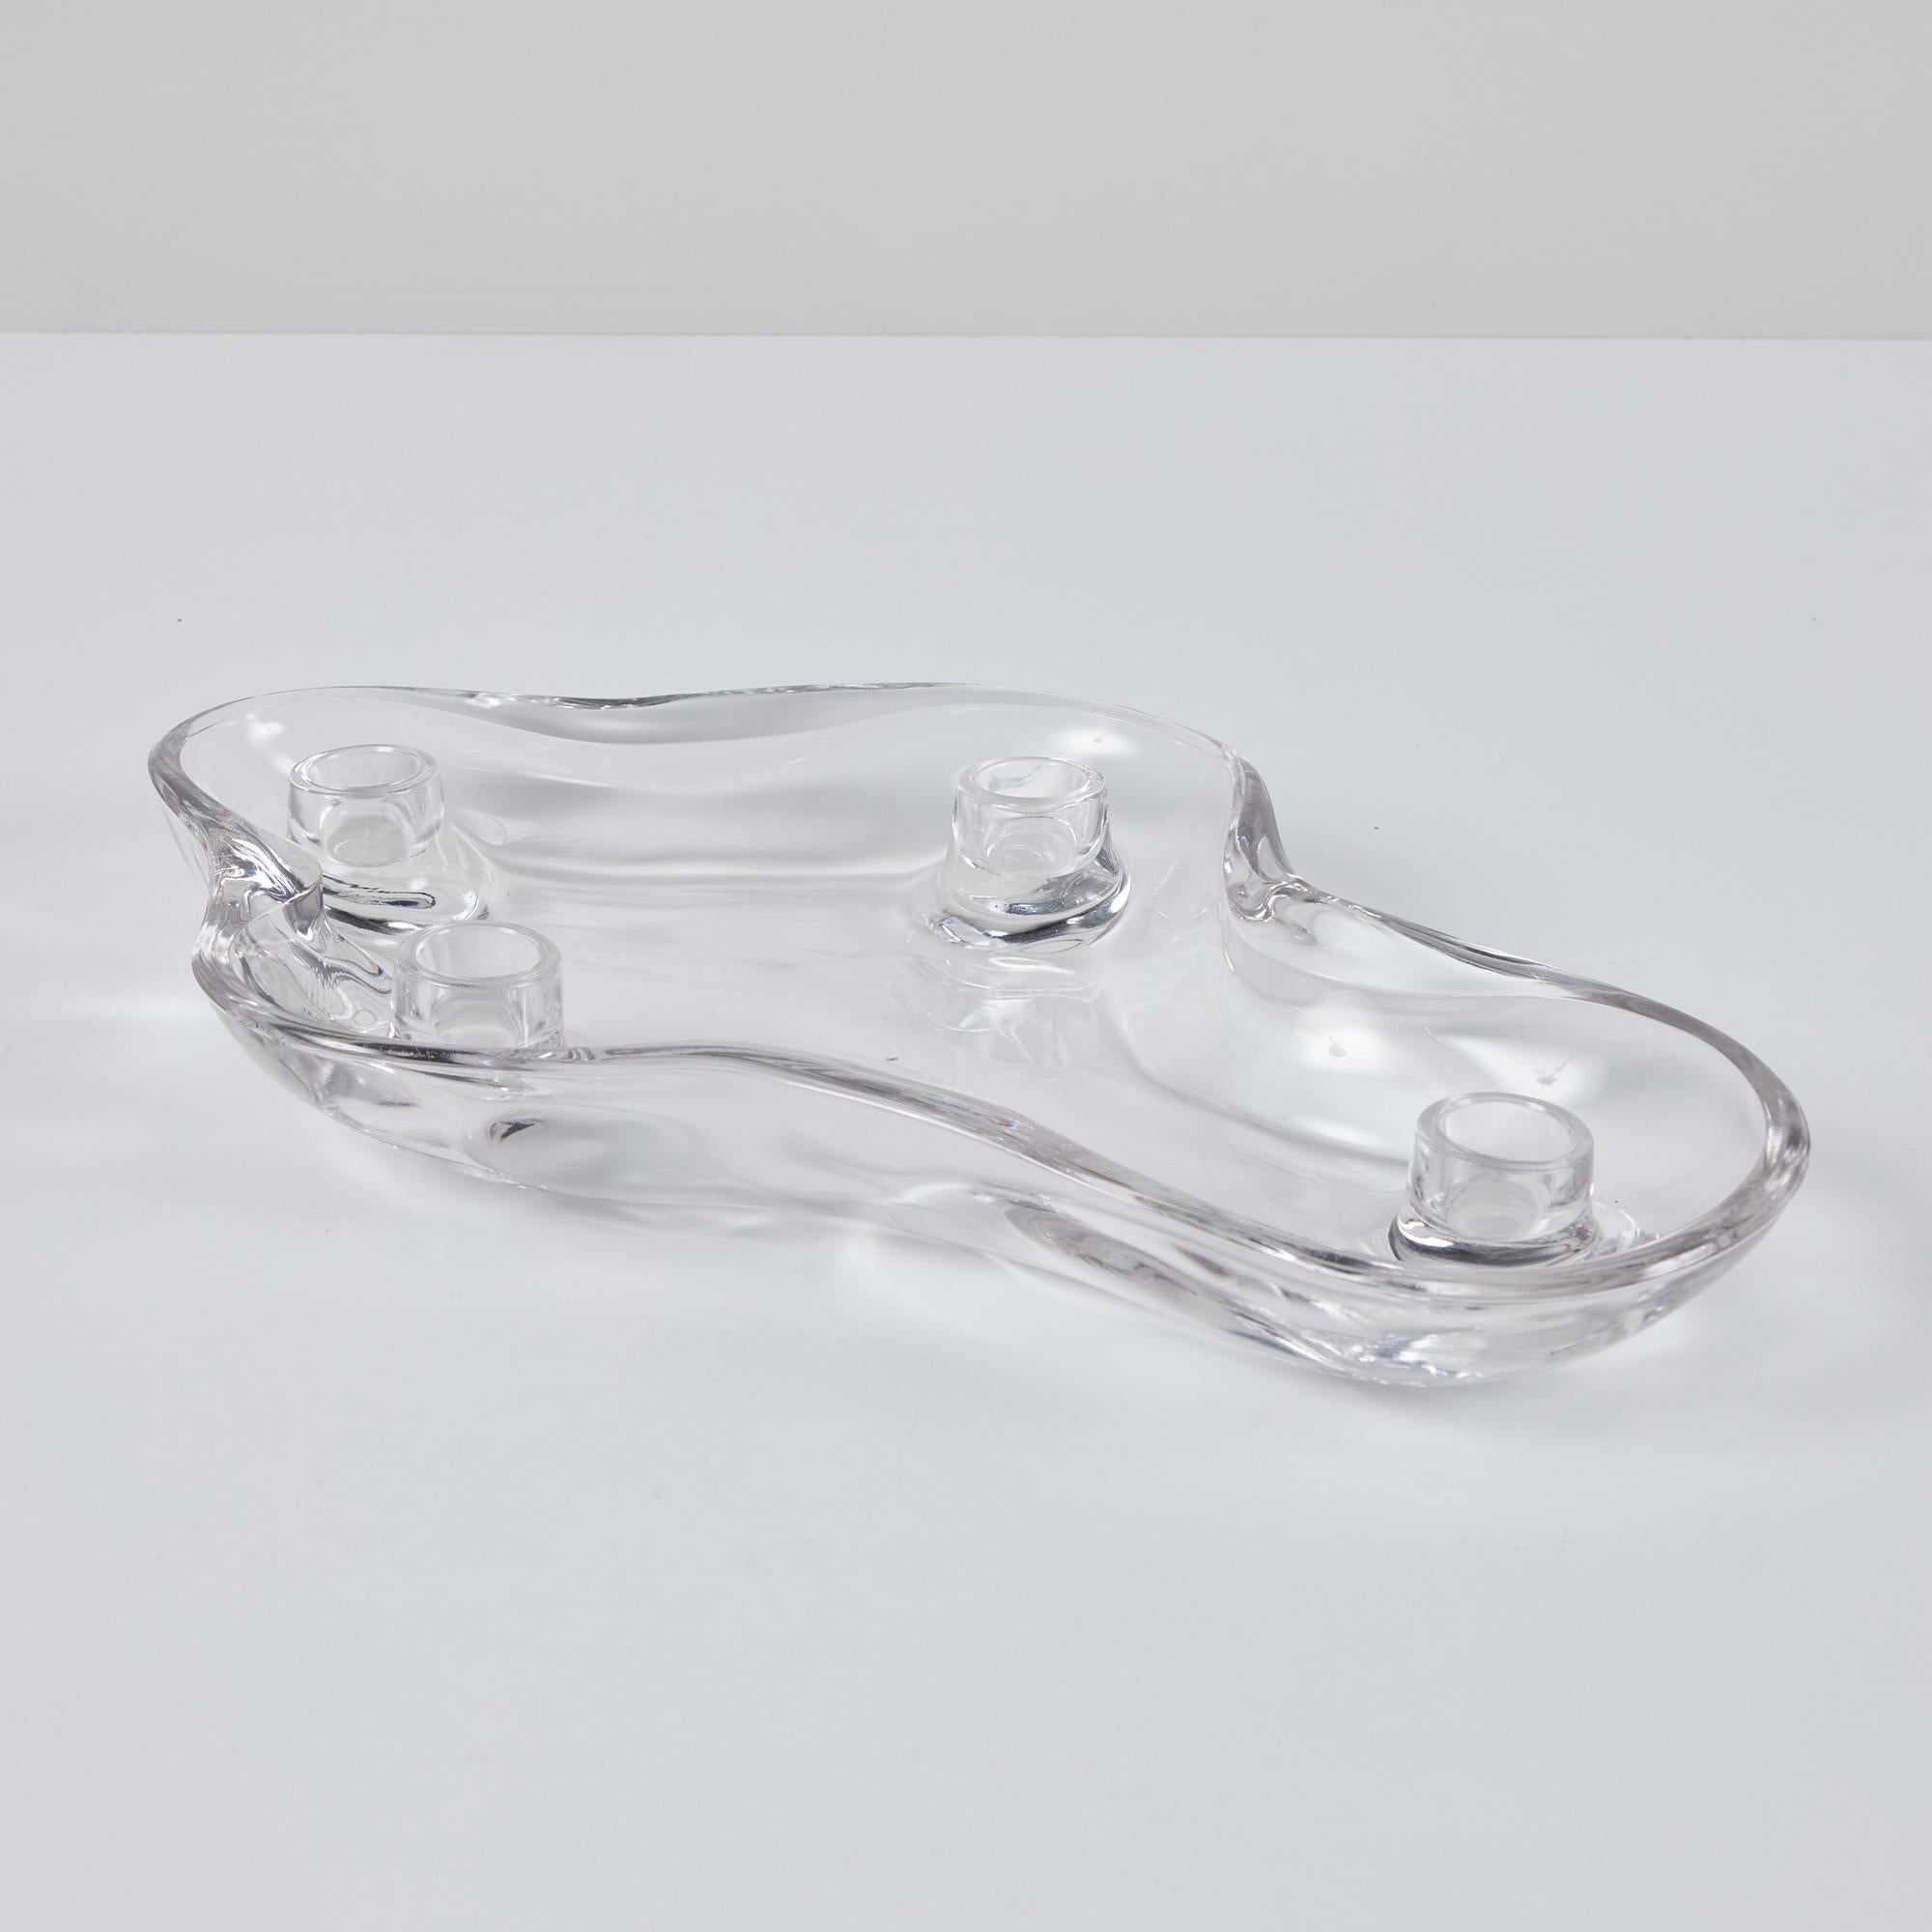 Biomorphic glass candle holder, by Pipsan Saarinen Swanson, c.1940s, USA for US Glass Company. Pipsan, part of the famous Saarinen cerated this smooth glass vessel which features a low profile and cavity for water to float flowers around 4 candle